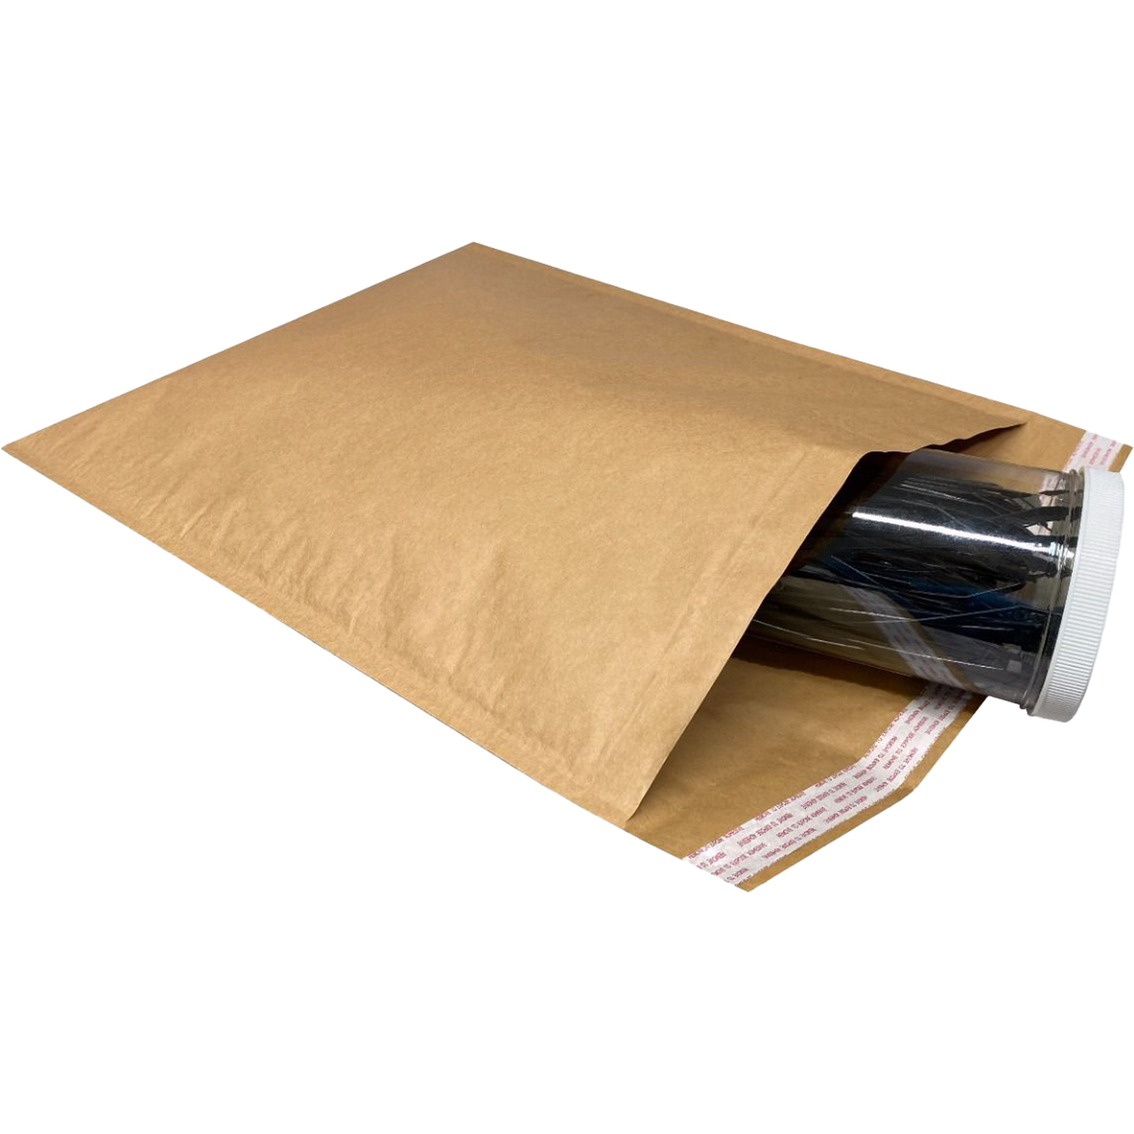 uBoxes Honeycomb Padded Shipping Envelope #7 14.25 x 19 in. Pack of 30 - Image 3 of 4